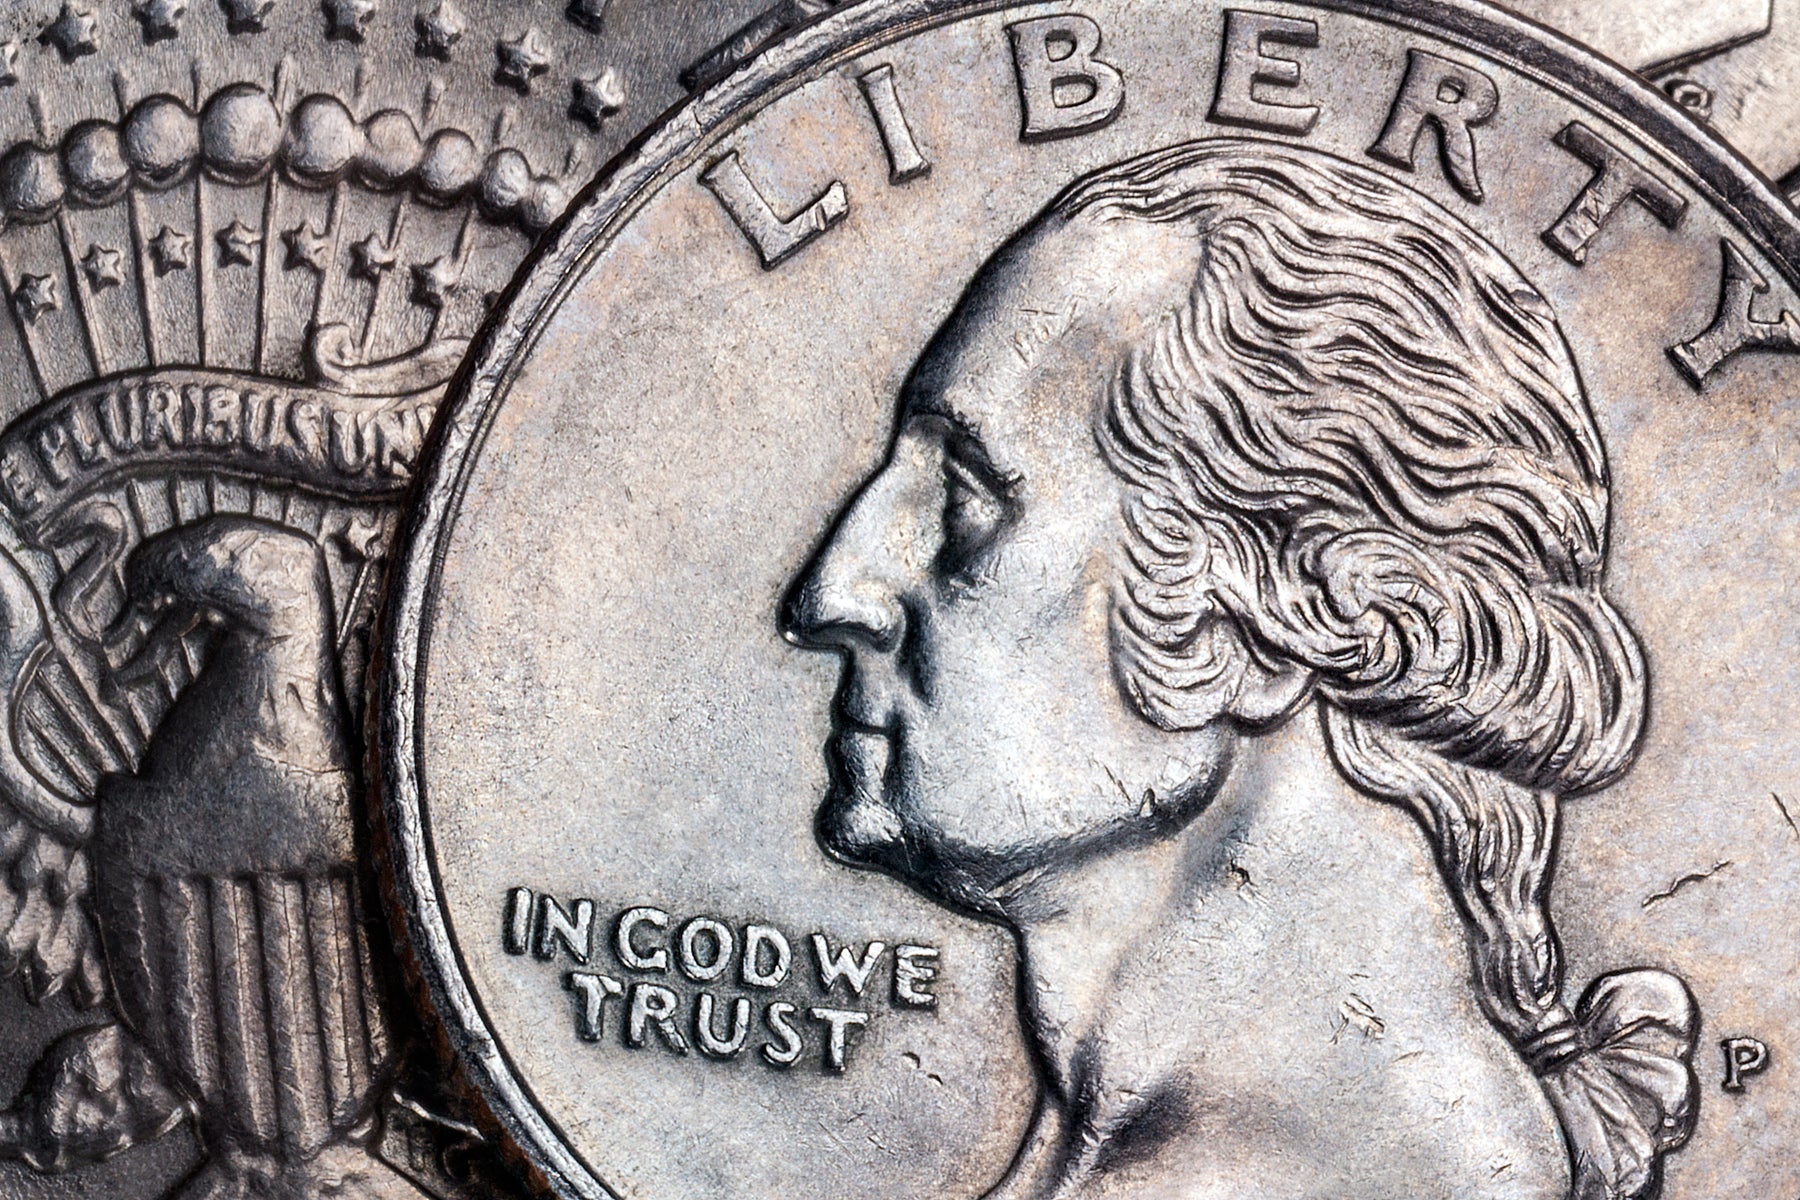 God Has Already won the war coin alludes to our need to trust in him it is a quarter with words "In God We Trust."